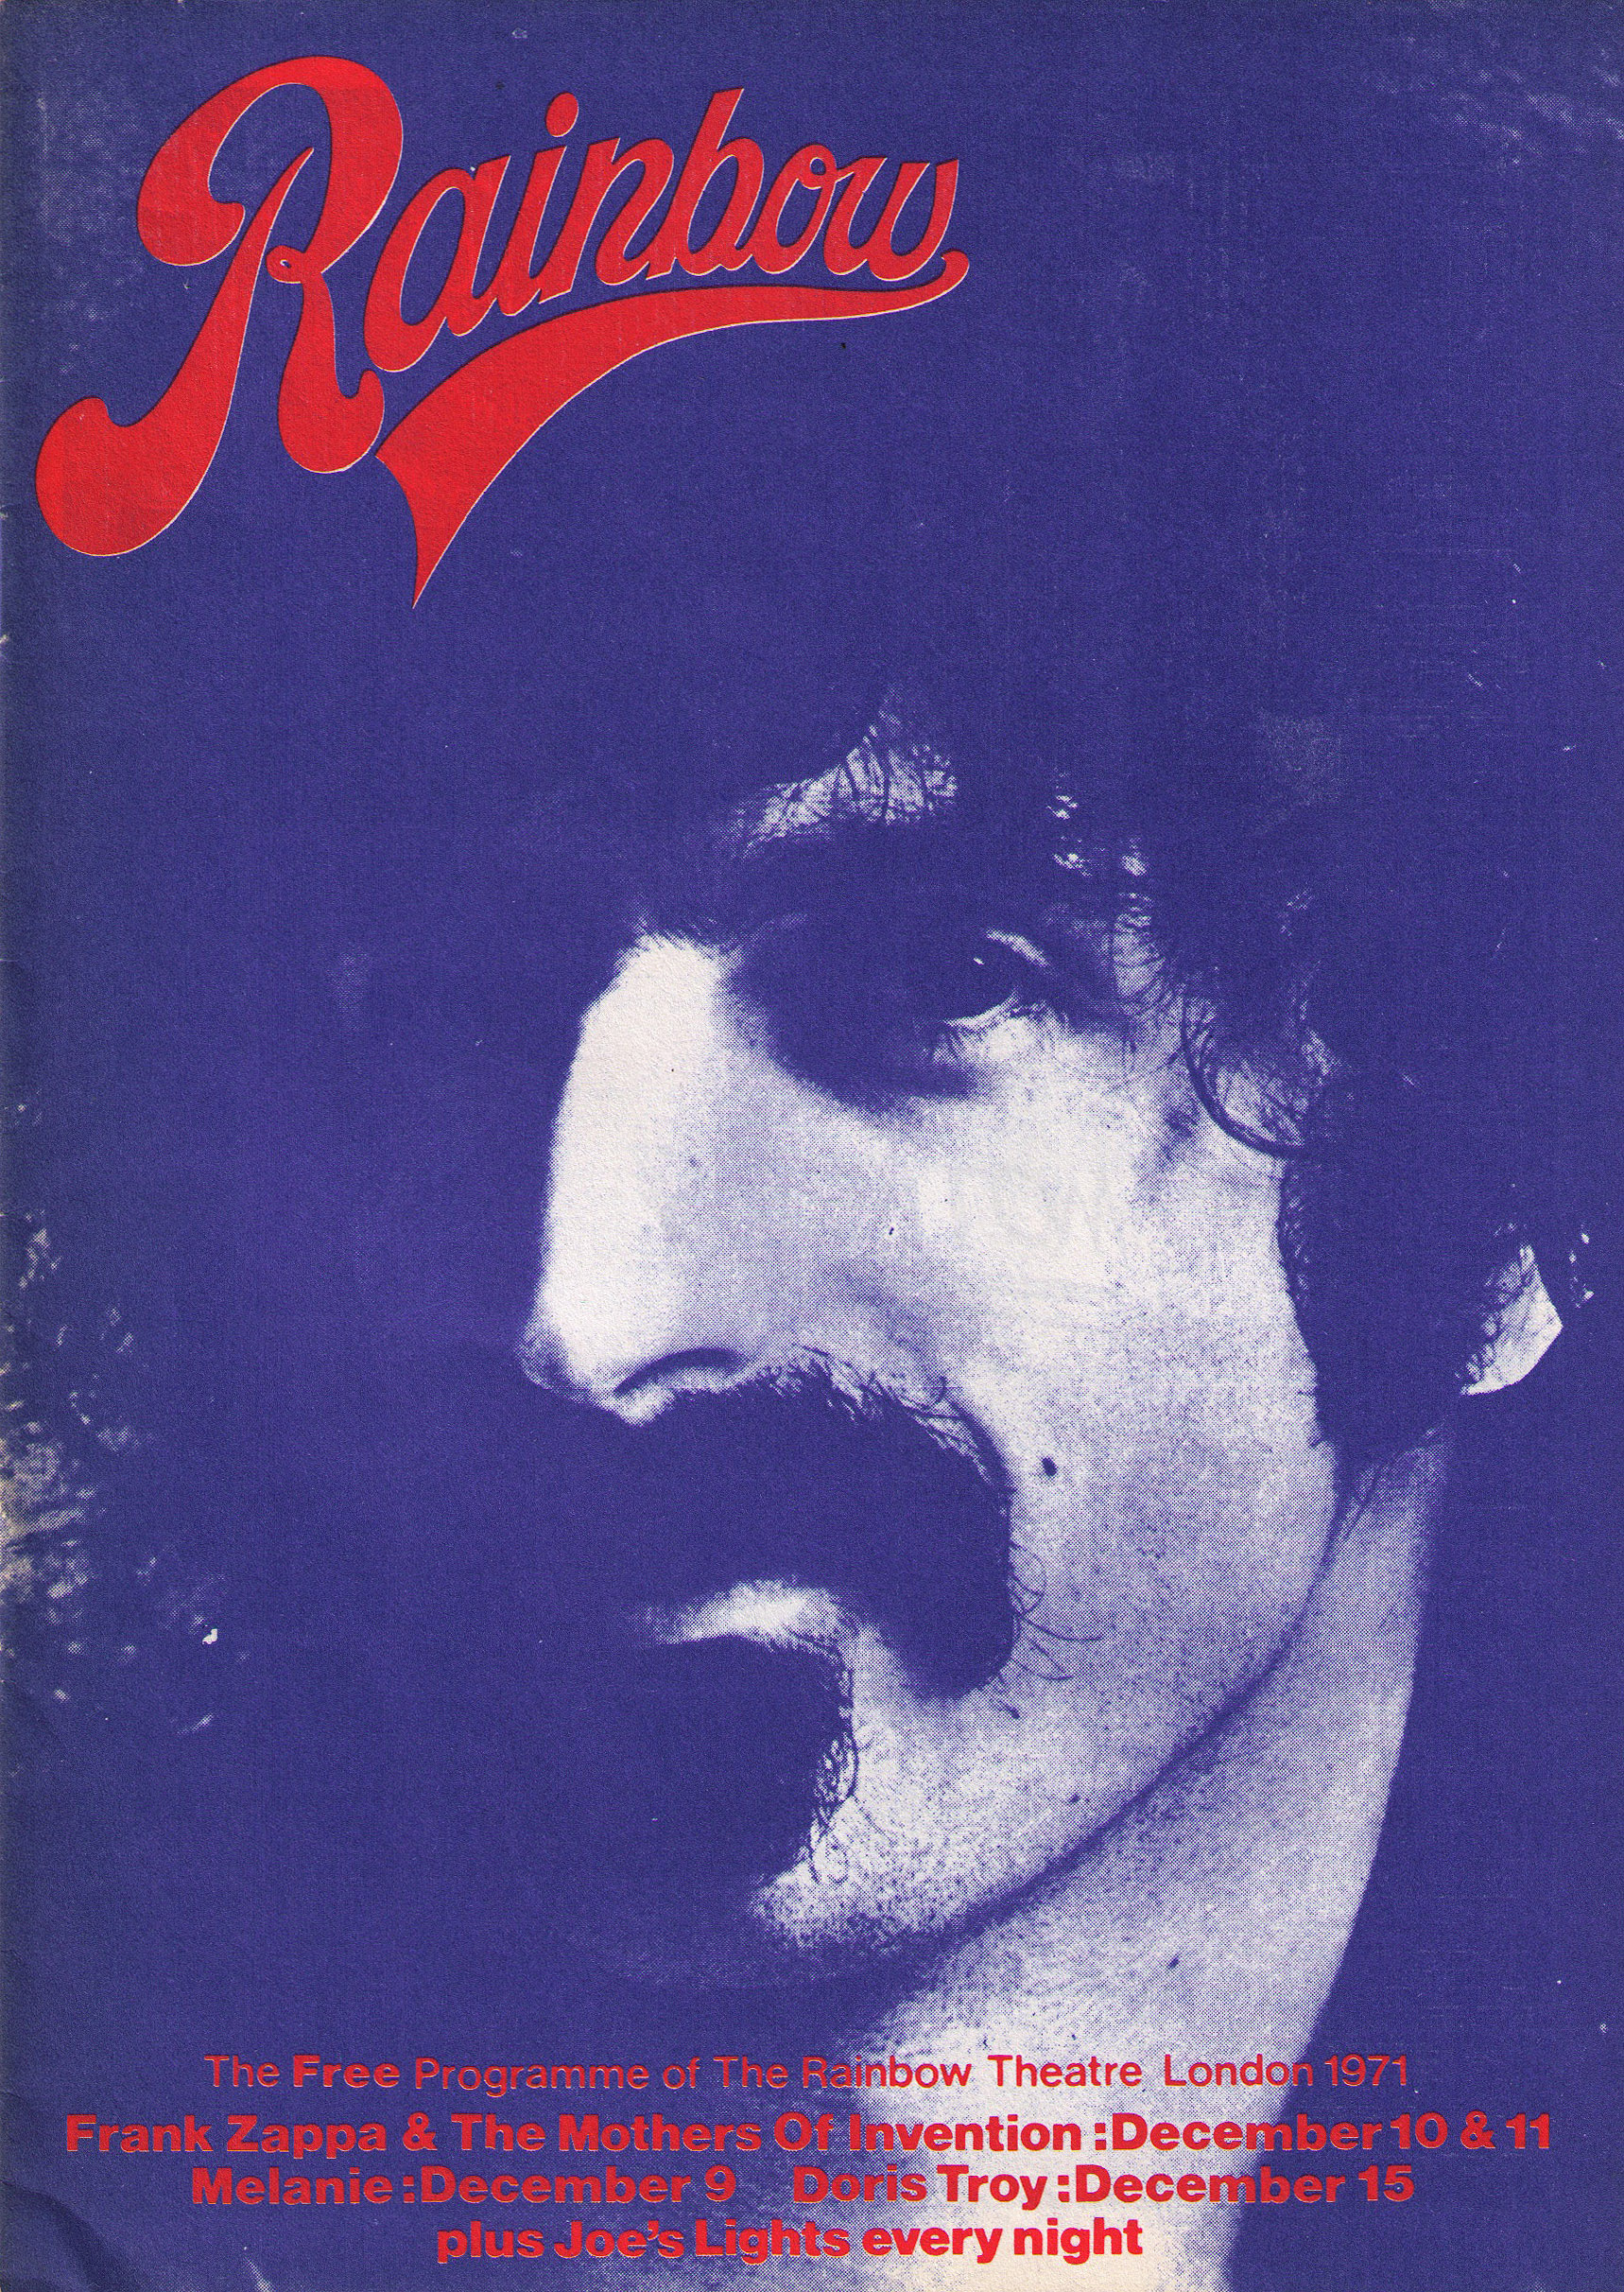 Frank Zappa And The Mothers Of Invention Original Concert Program